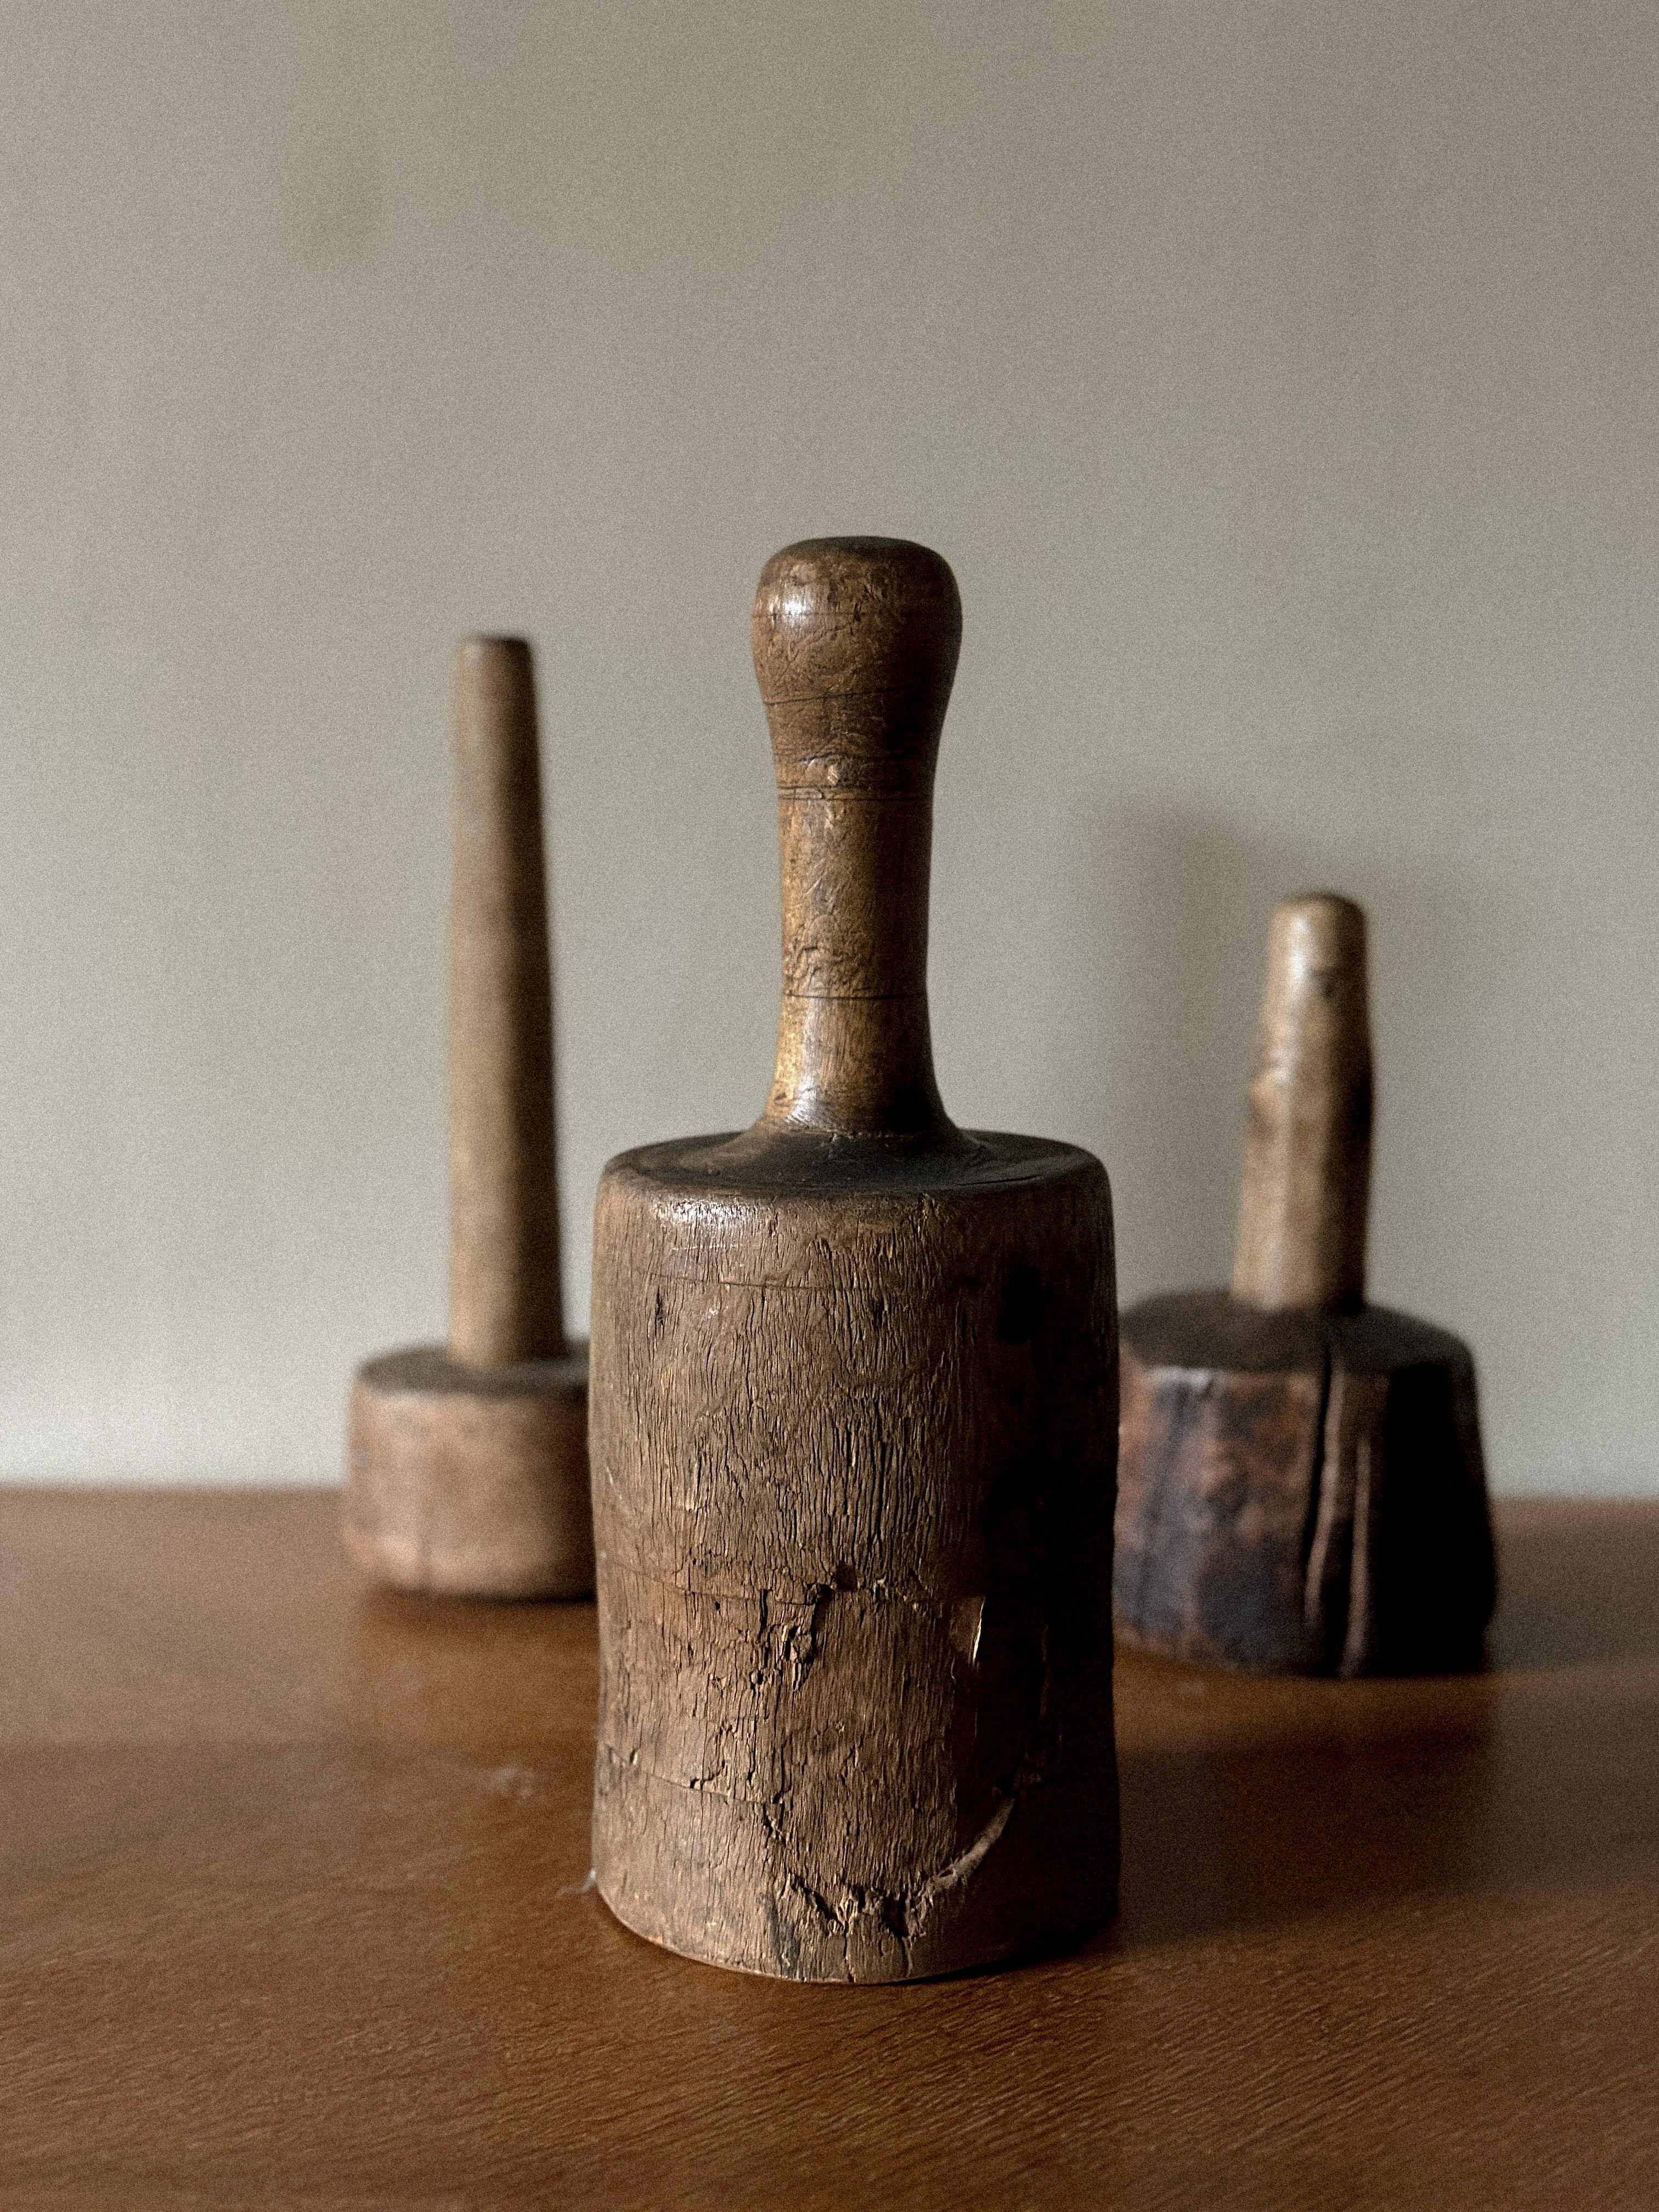 A Trio of Antique Wooden Pestles from 19th Century Scandinavia

Discover the essence of simplicity and beauty through our exquisite set of three Antique Wabi-Sabi Wooden Pestles, each whispering a tale of time and tradition from 19th century